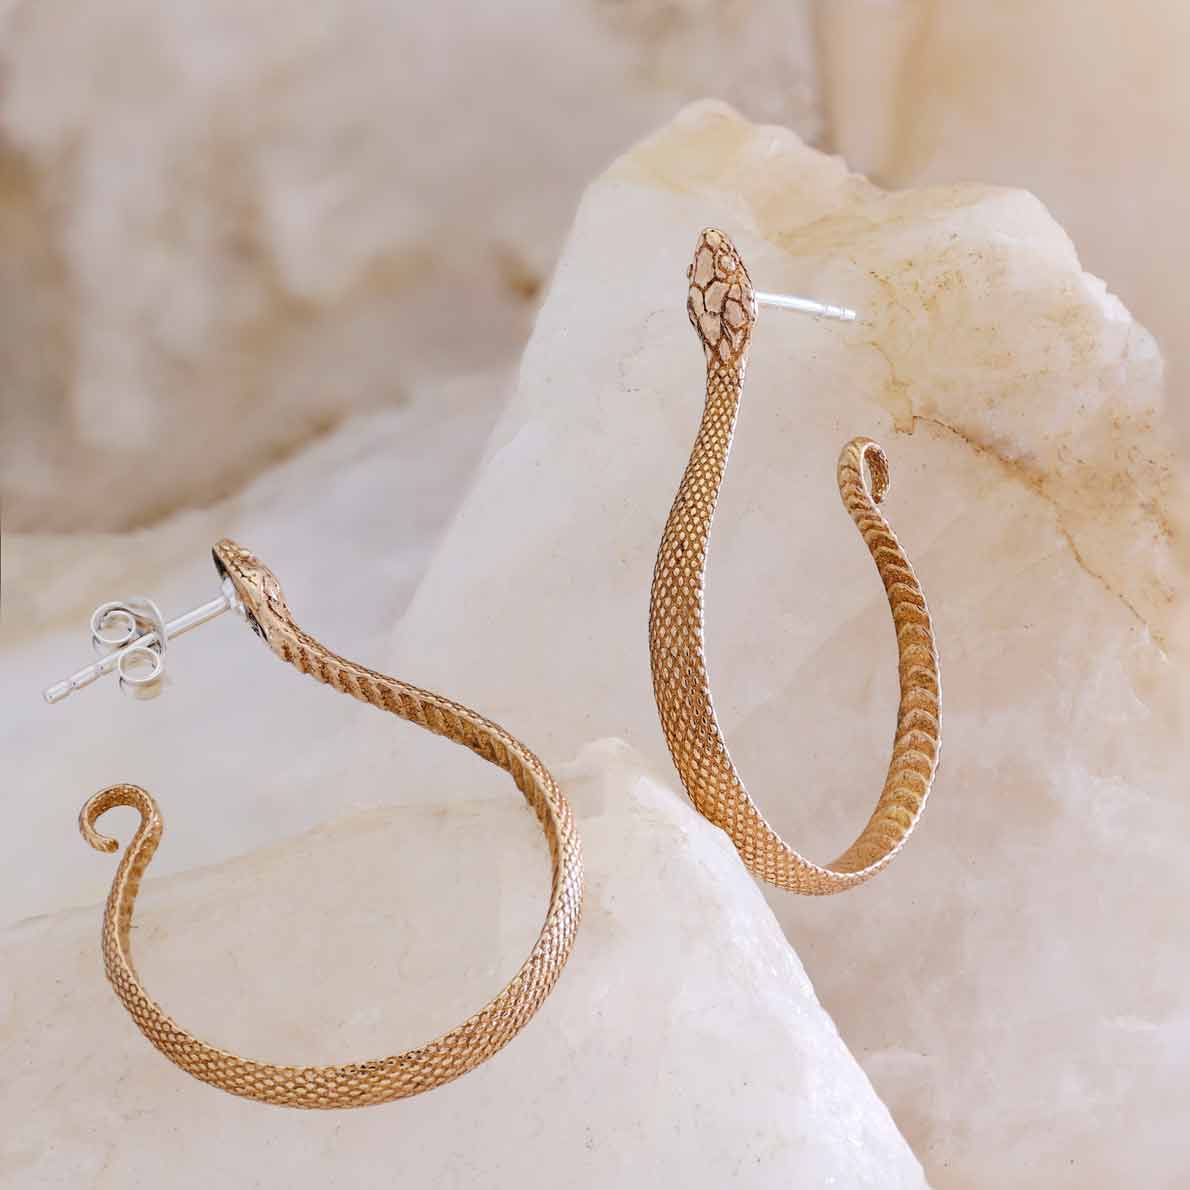 Silver studs with bronze snake